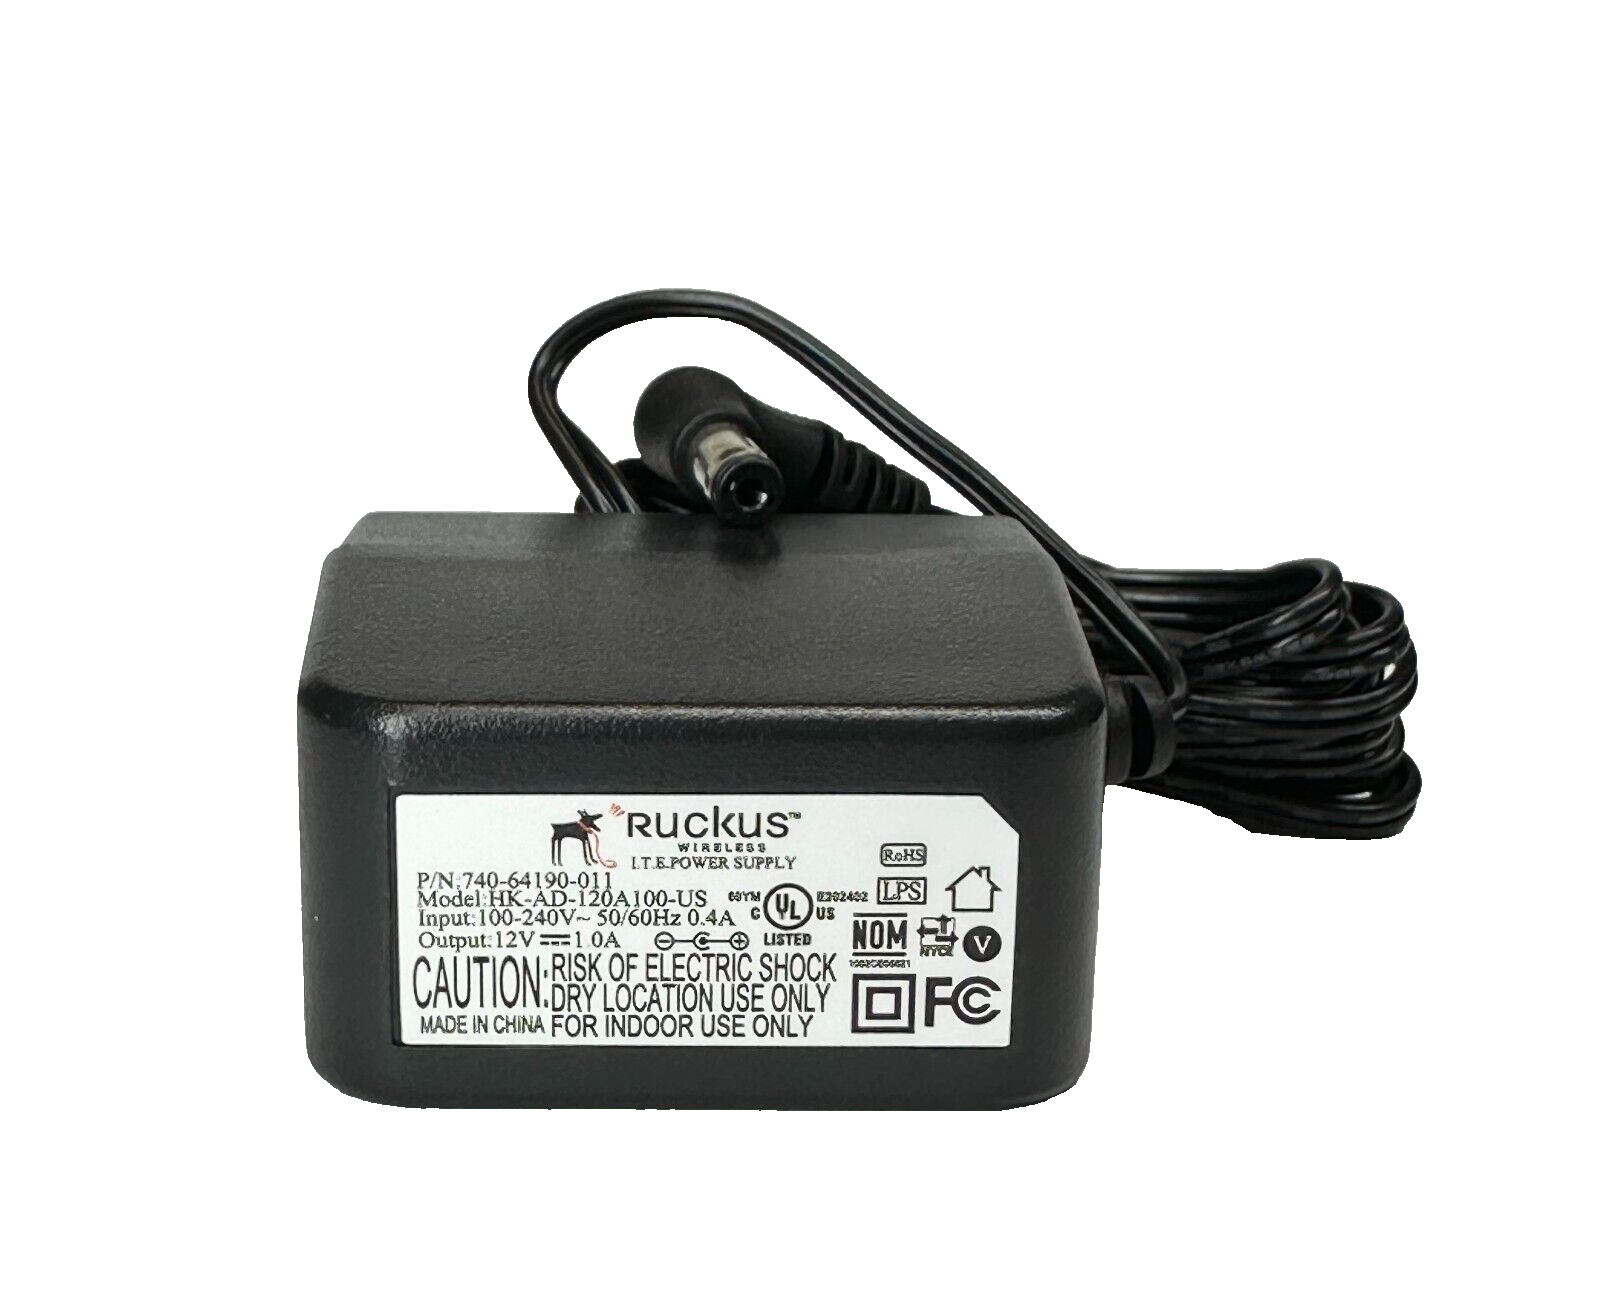 *Brand NEW*12VDC 1.0A MPN 740-64190-001 Model HK-AD-120A100-US Ruckus Power Supply - Click Image to Close